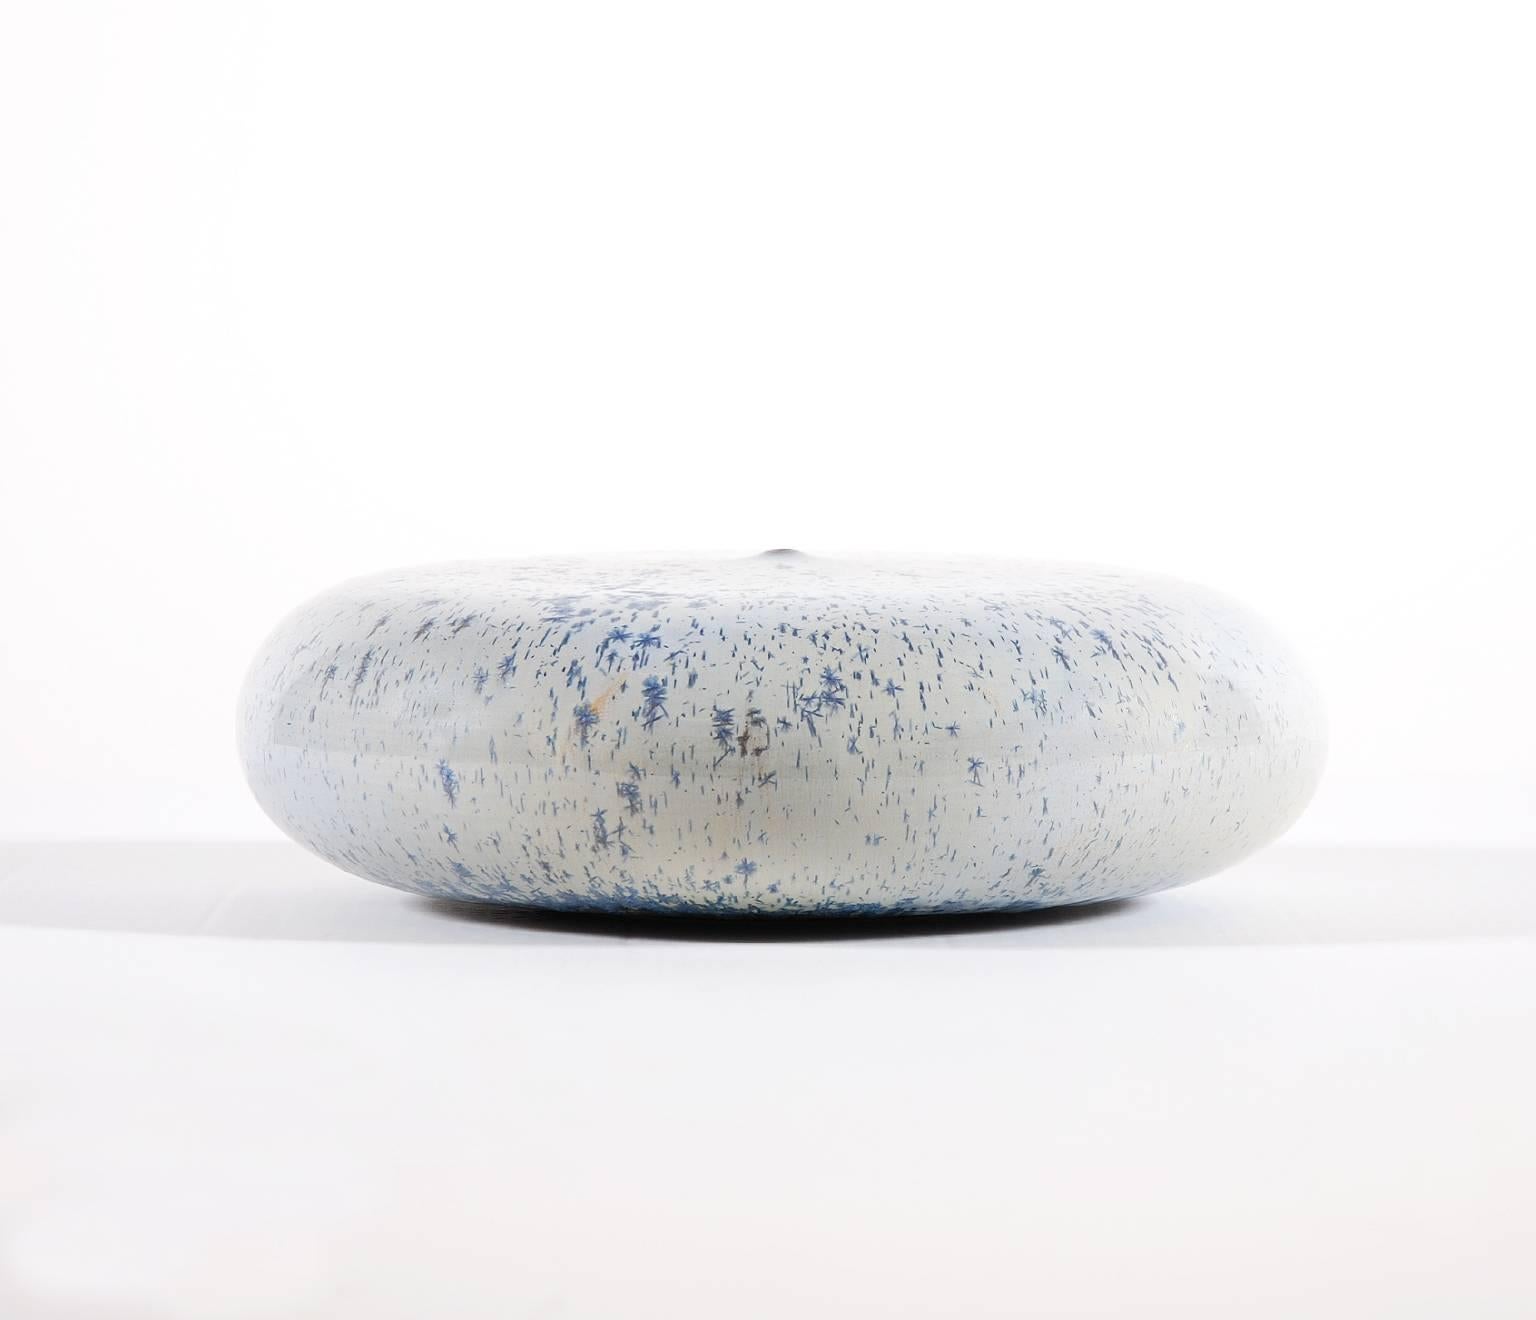 Ceramic sculpture by the Belgian ceramist Antonio Lampecco.

Round ceramic with crystallized enamel and a tiny aperture removing any function to the object.

An Humble Lampecco Quote:
My pots with tiny orifice have to be meaningless, I didn't